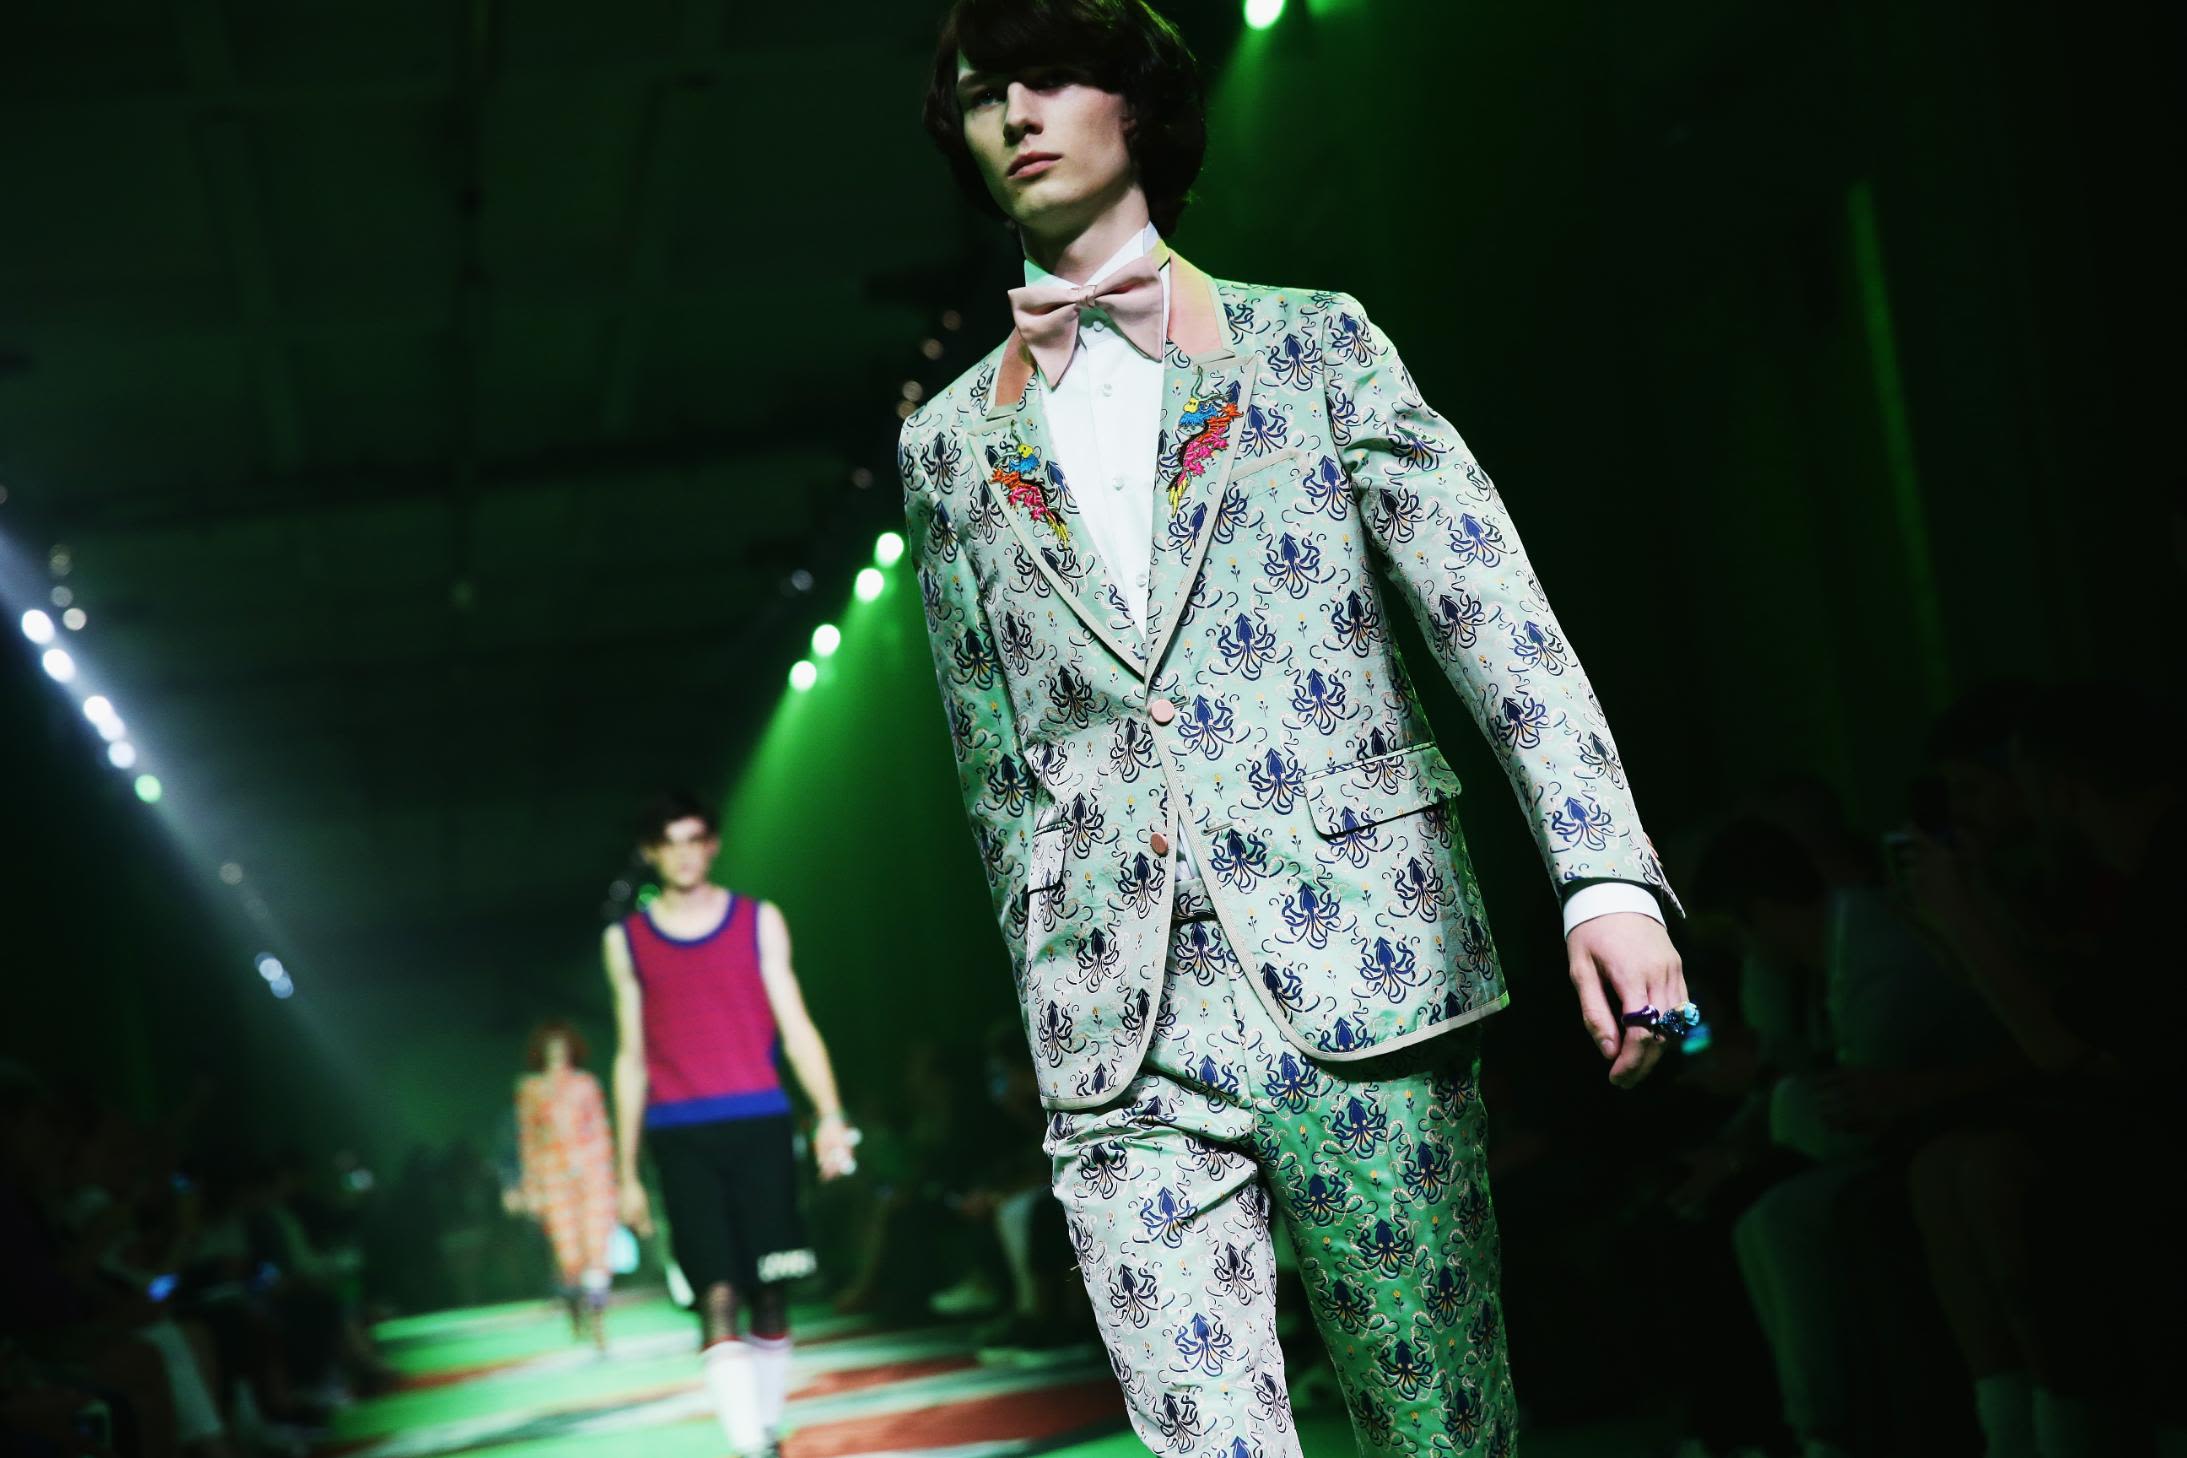 Gucci Spring/Summer 2018 Men's Runway Collection